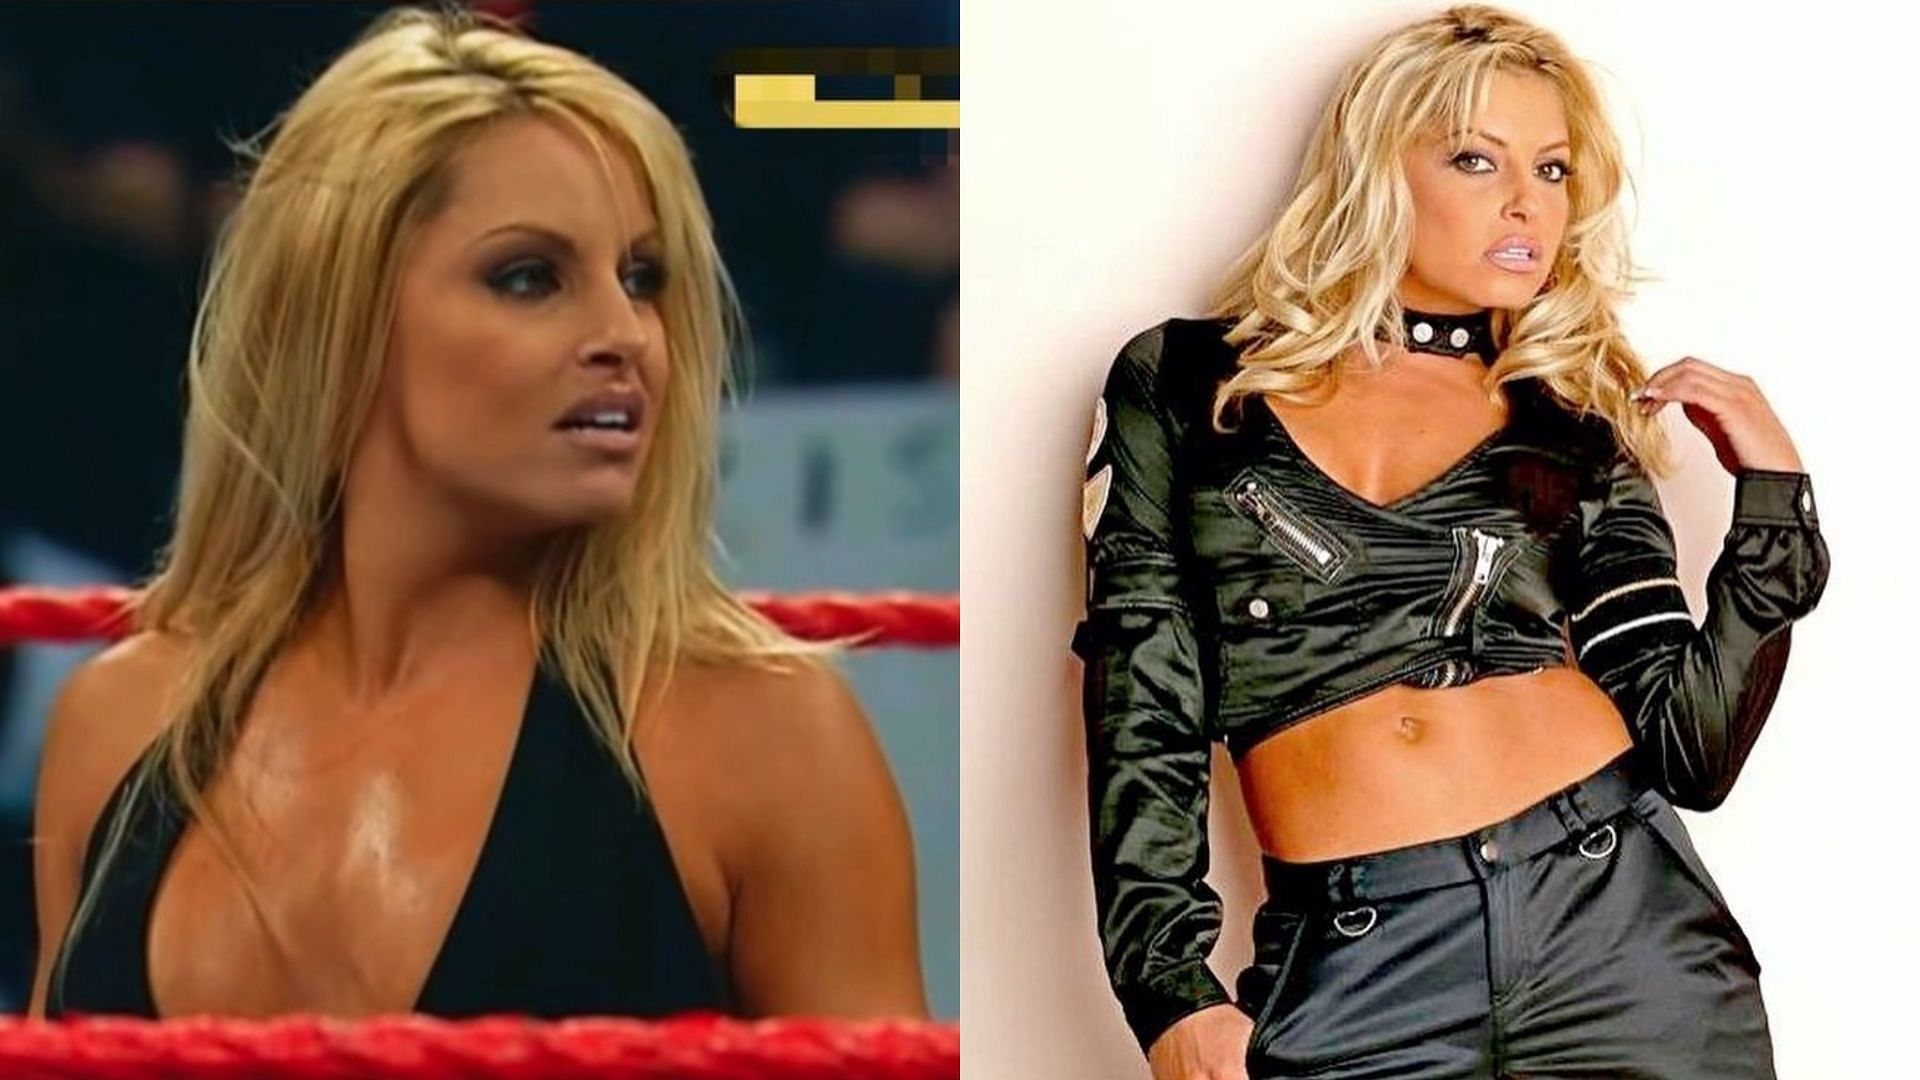 WWE Hall of Famer Trish Stratus refused to do a kissing spot with former co-worker